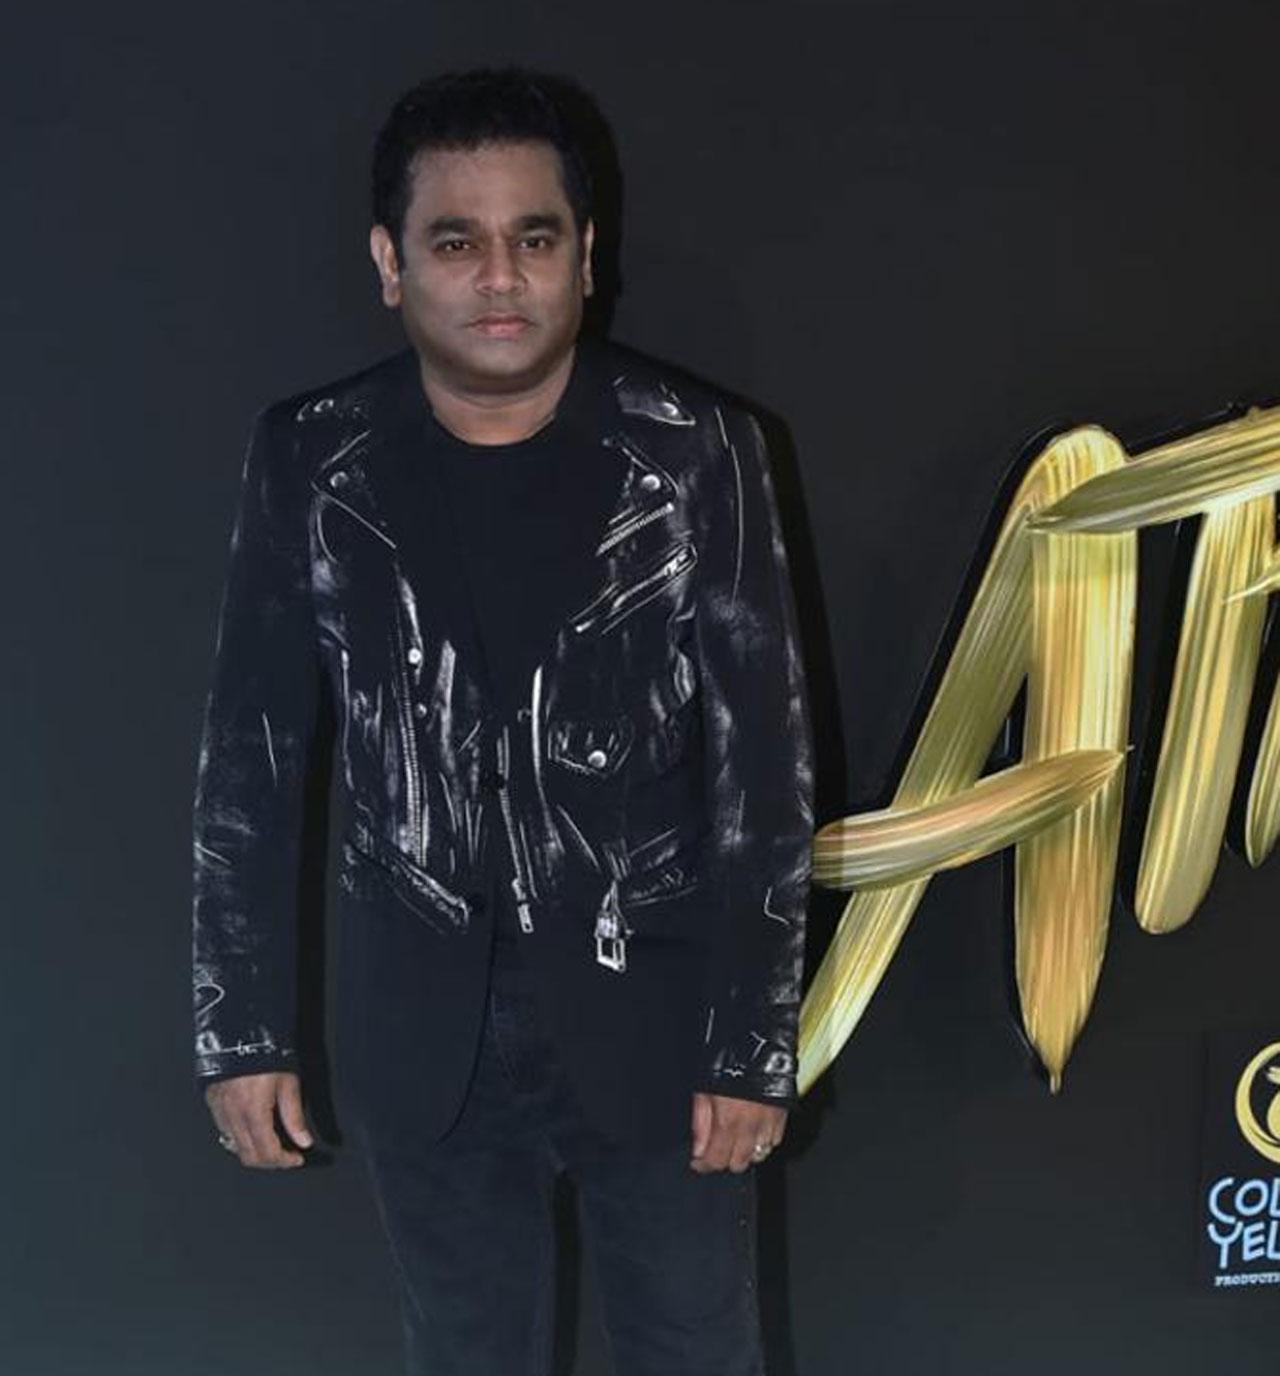 The music launch saw A. R. Rahman crooning to the best songs from the film. The audience had its feet tapping to Toofan Si Kudi, Tere Rang, Tumhein Mohabbat and a flute rendition of Tere Rang.